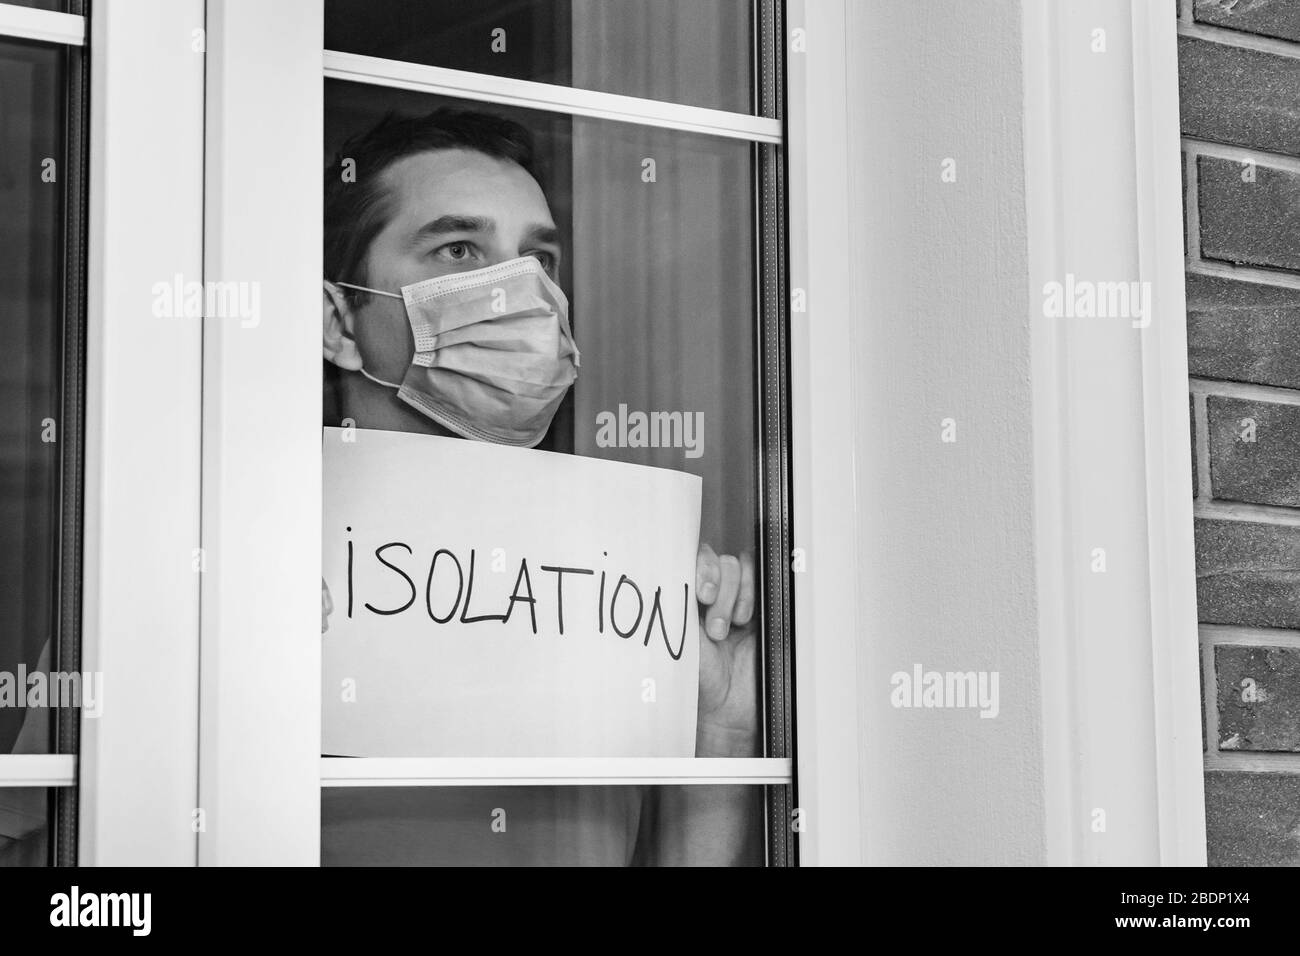 Man holds a sign that says - ISOLATION. BW photo Stock Photo